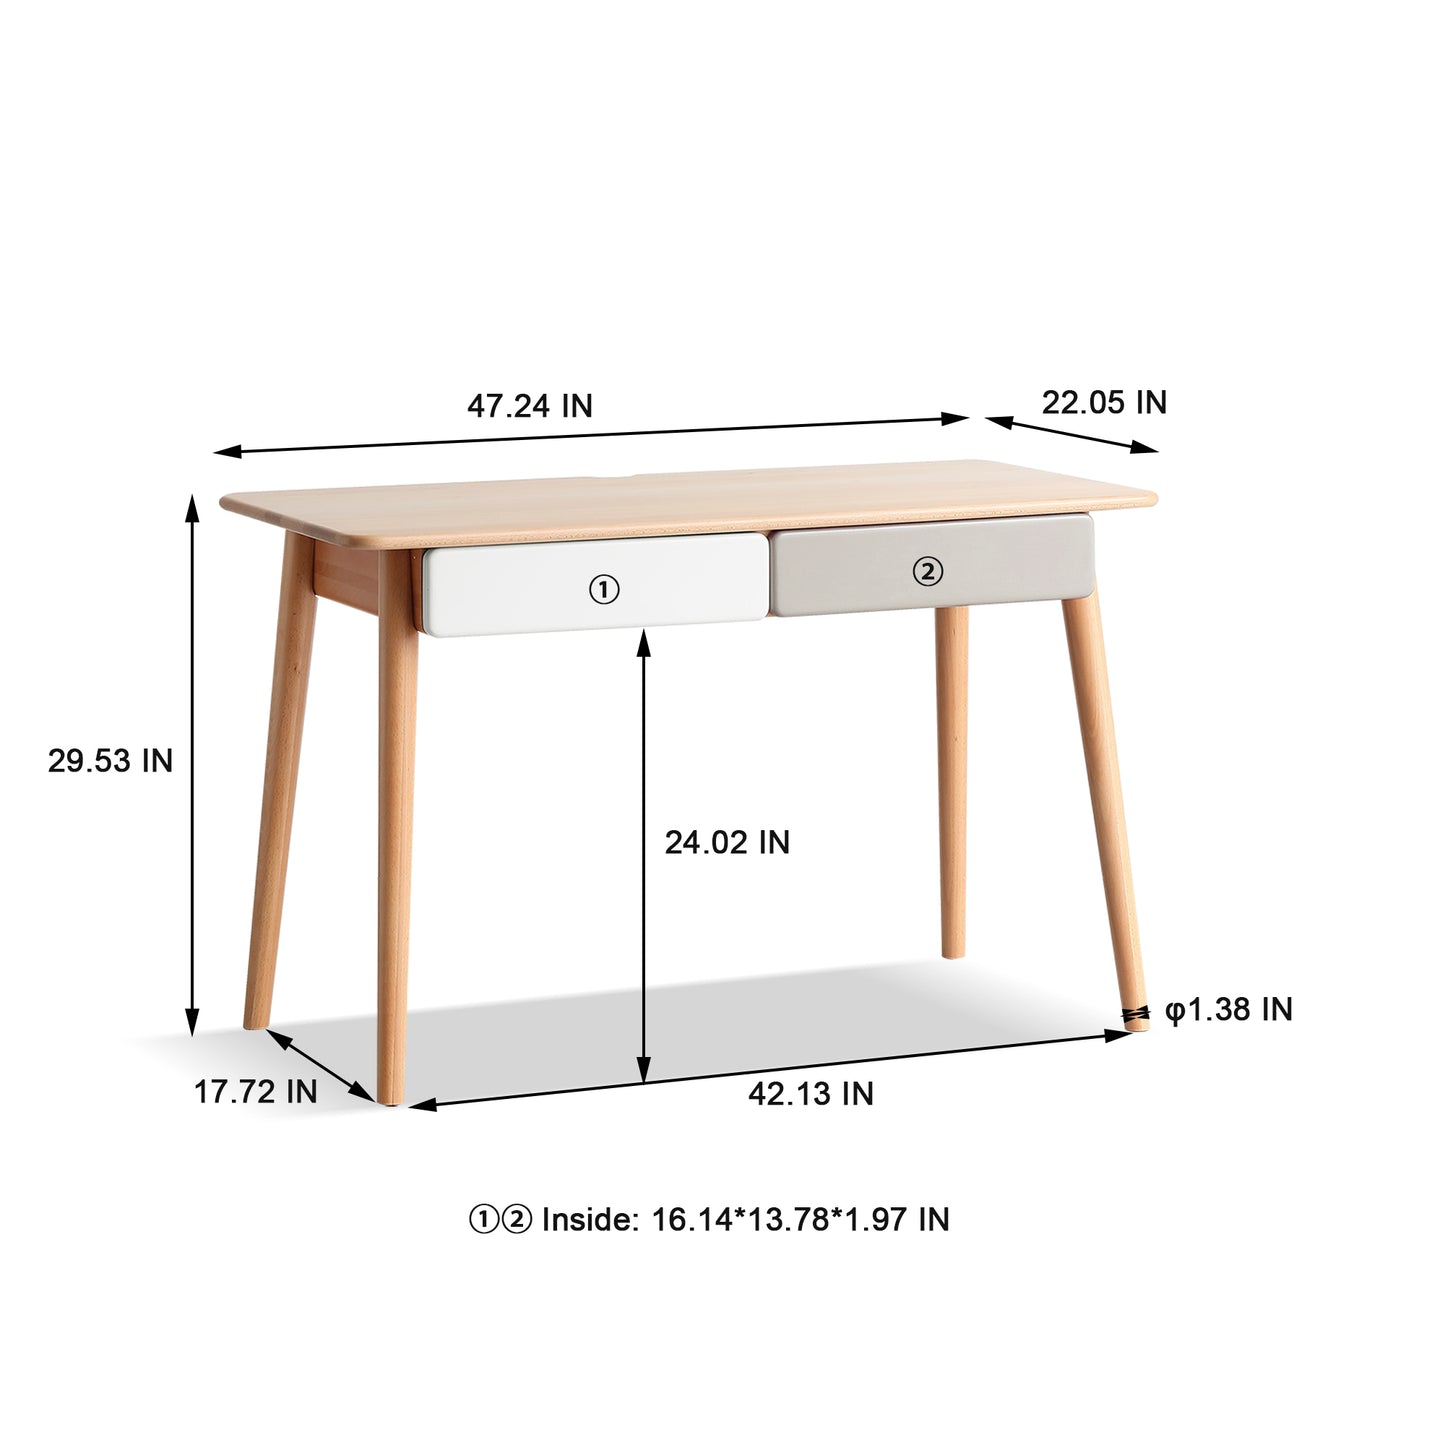 Yeswood Solid Wood Computer Desk in Natural Finish